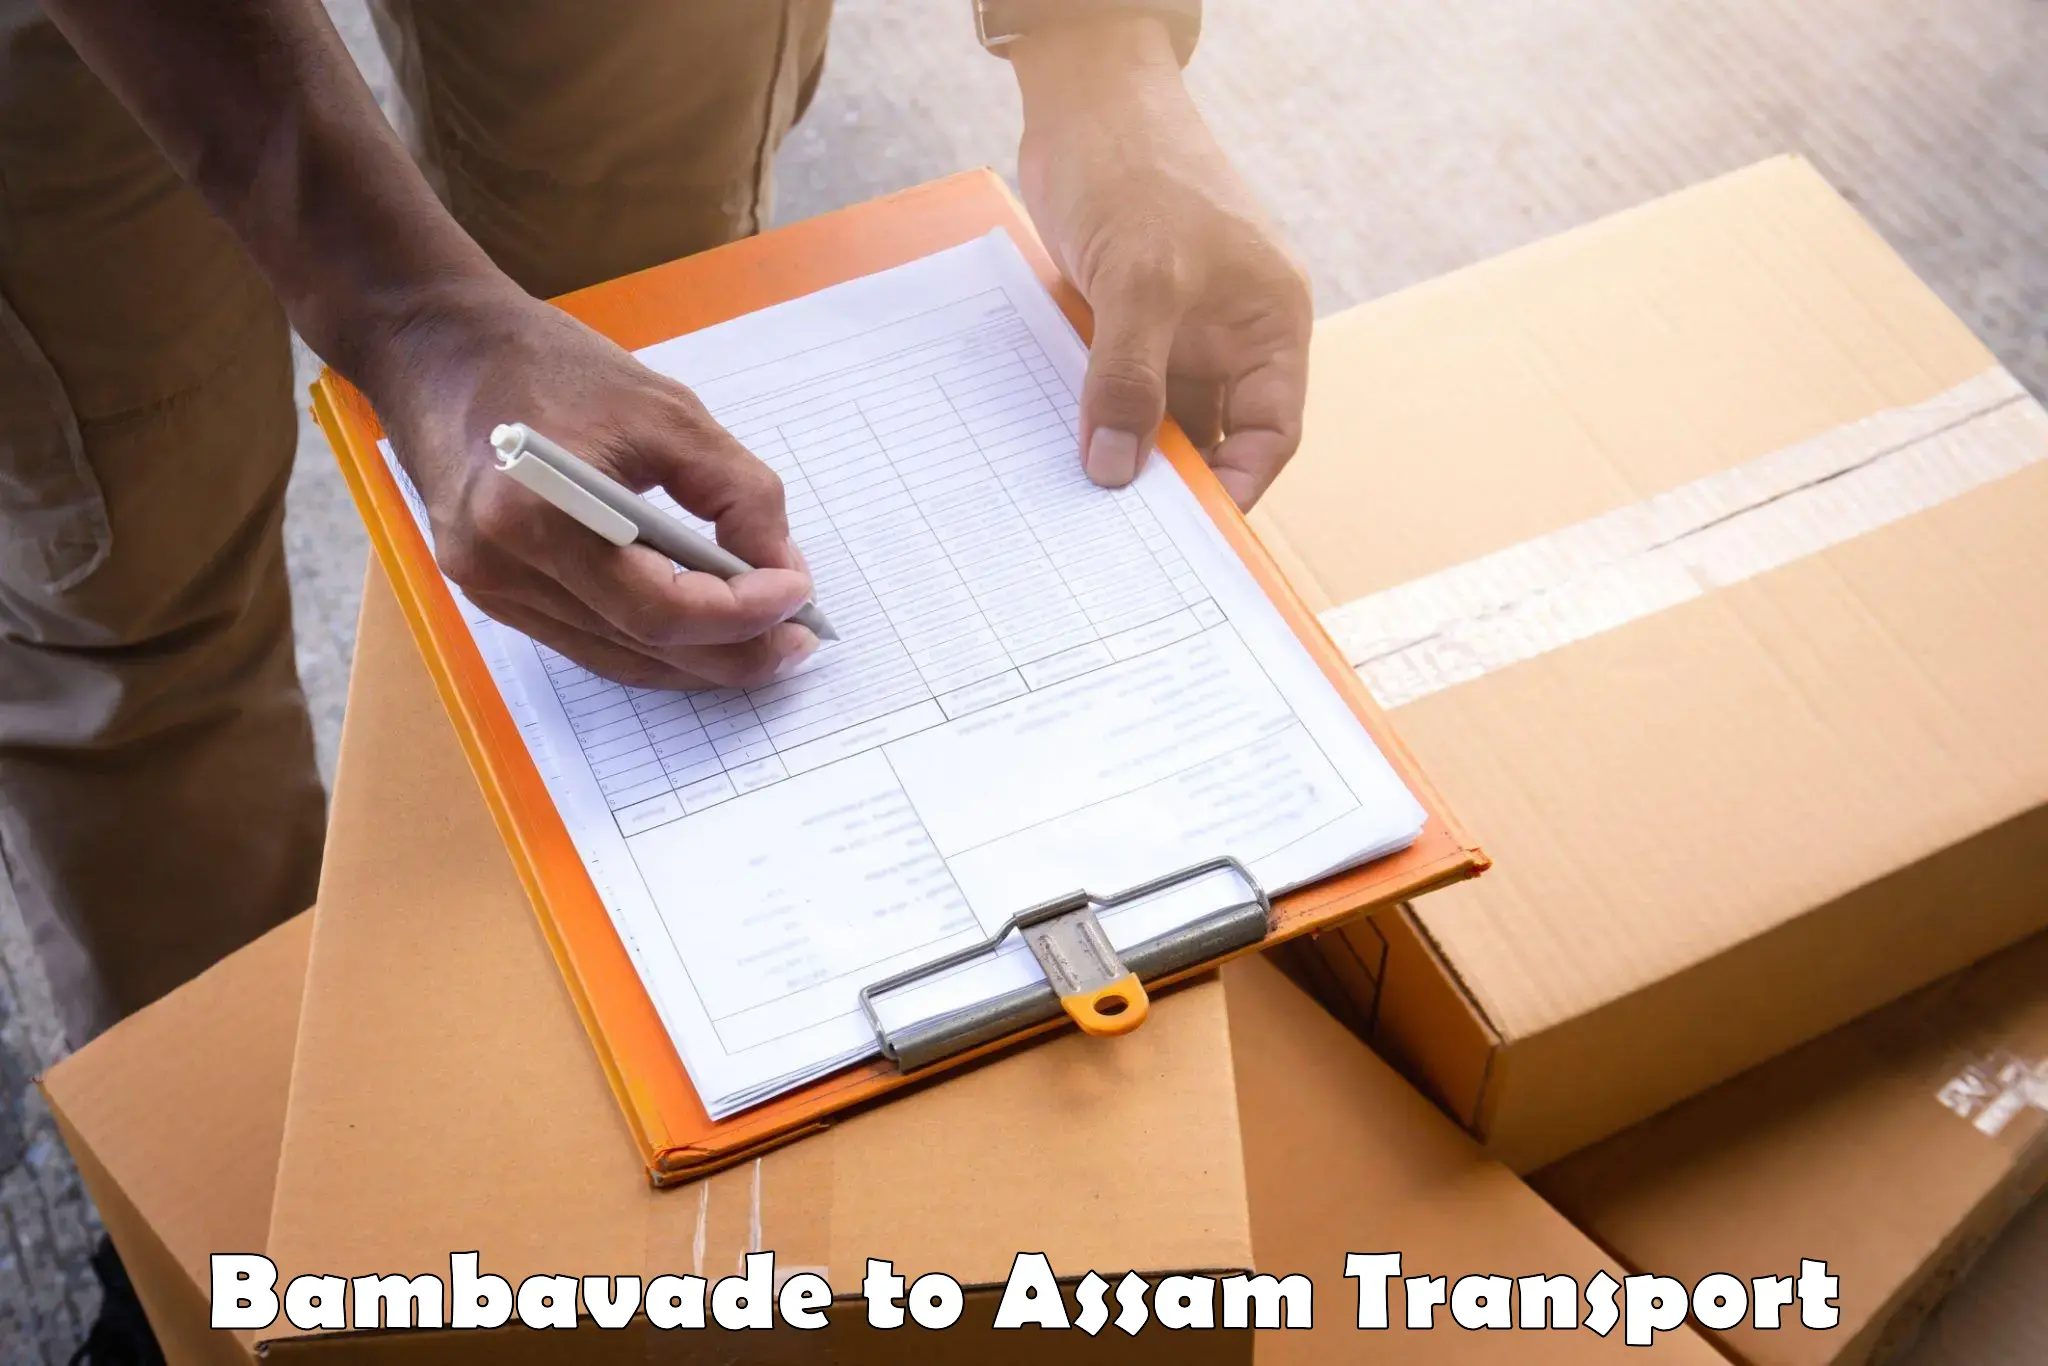 Container transport service Bambavade to Sonitpur